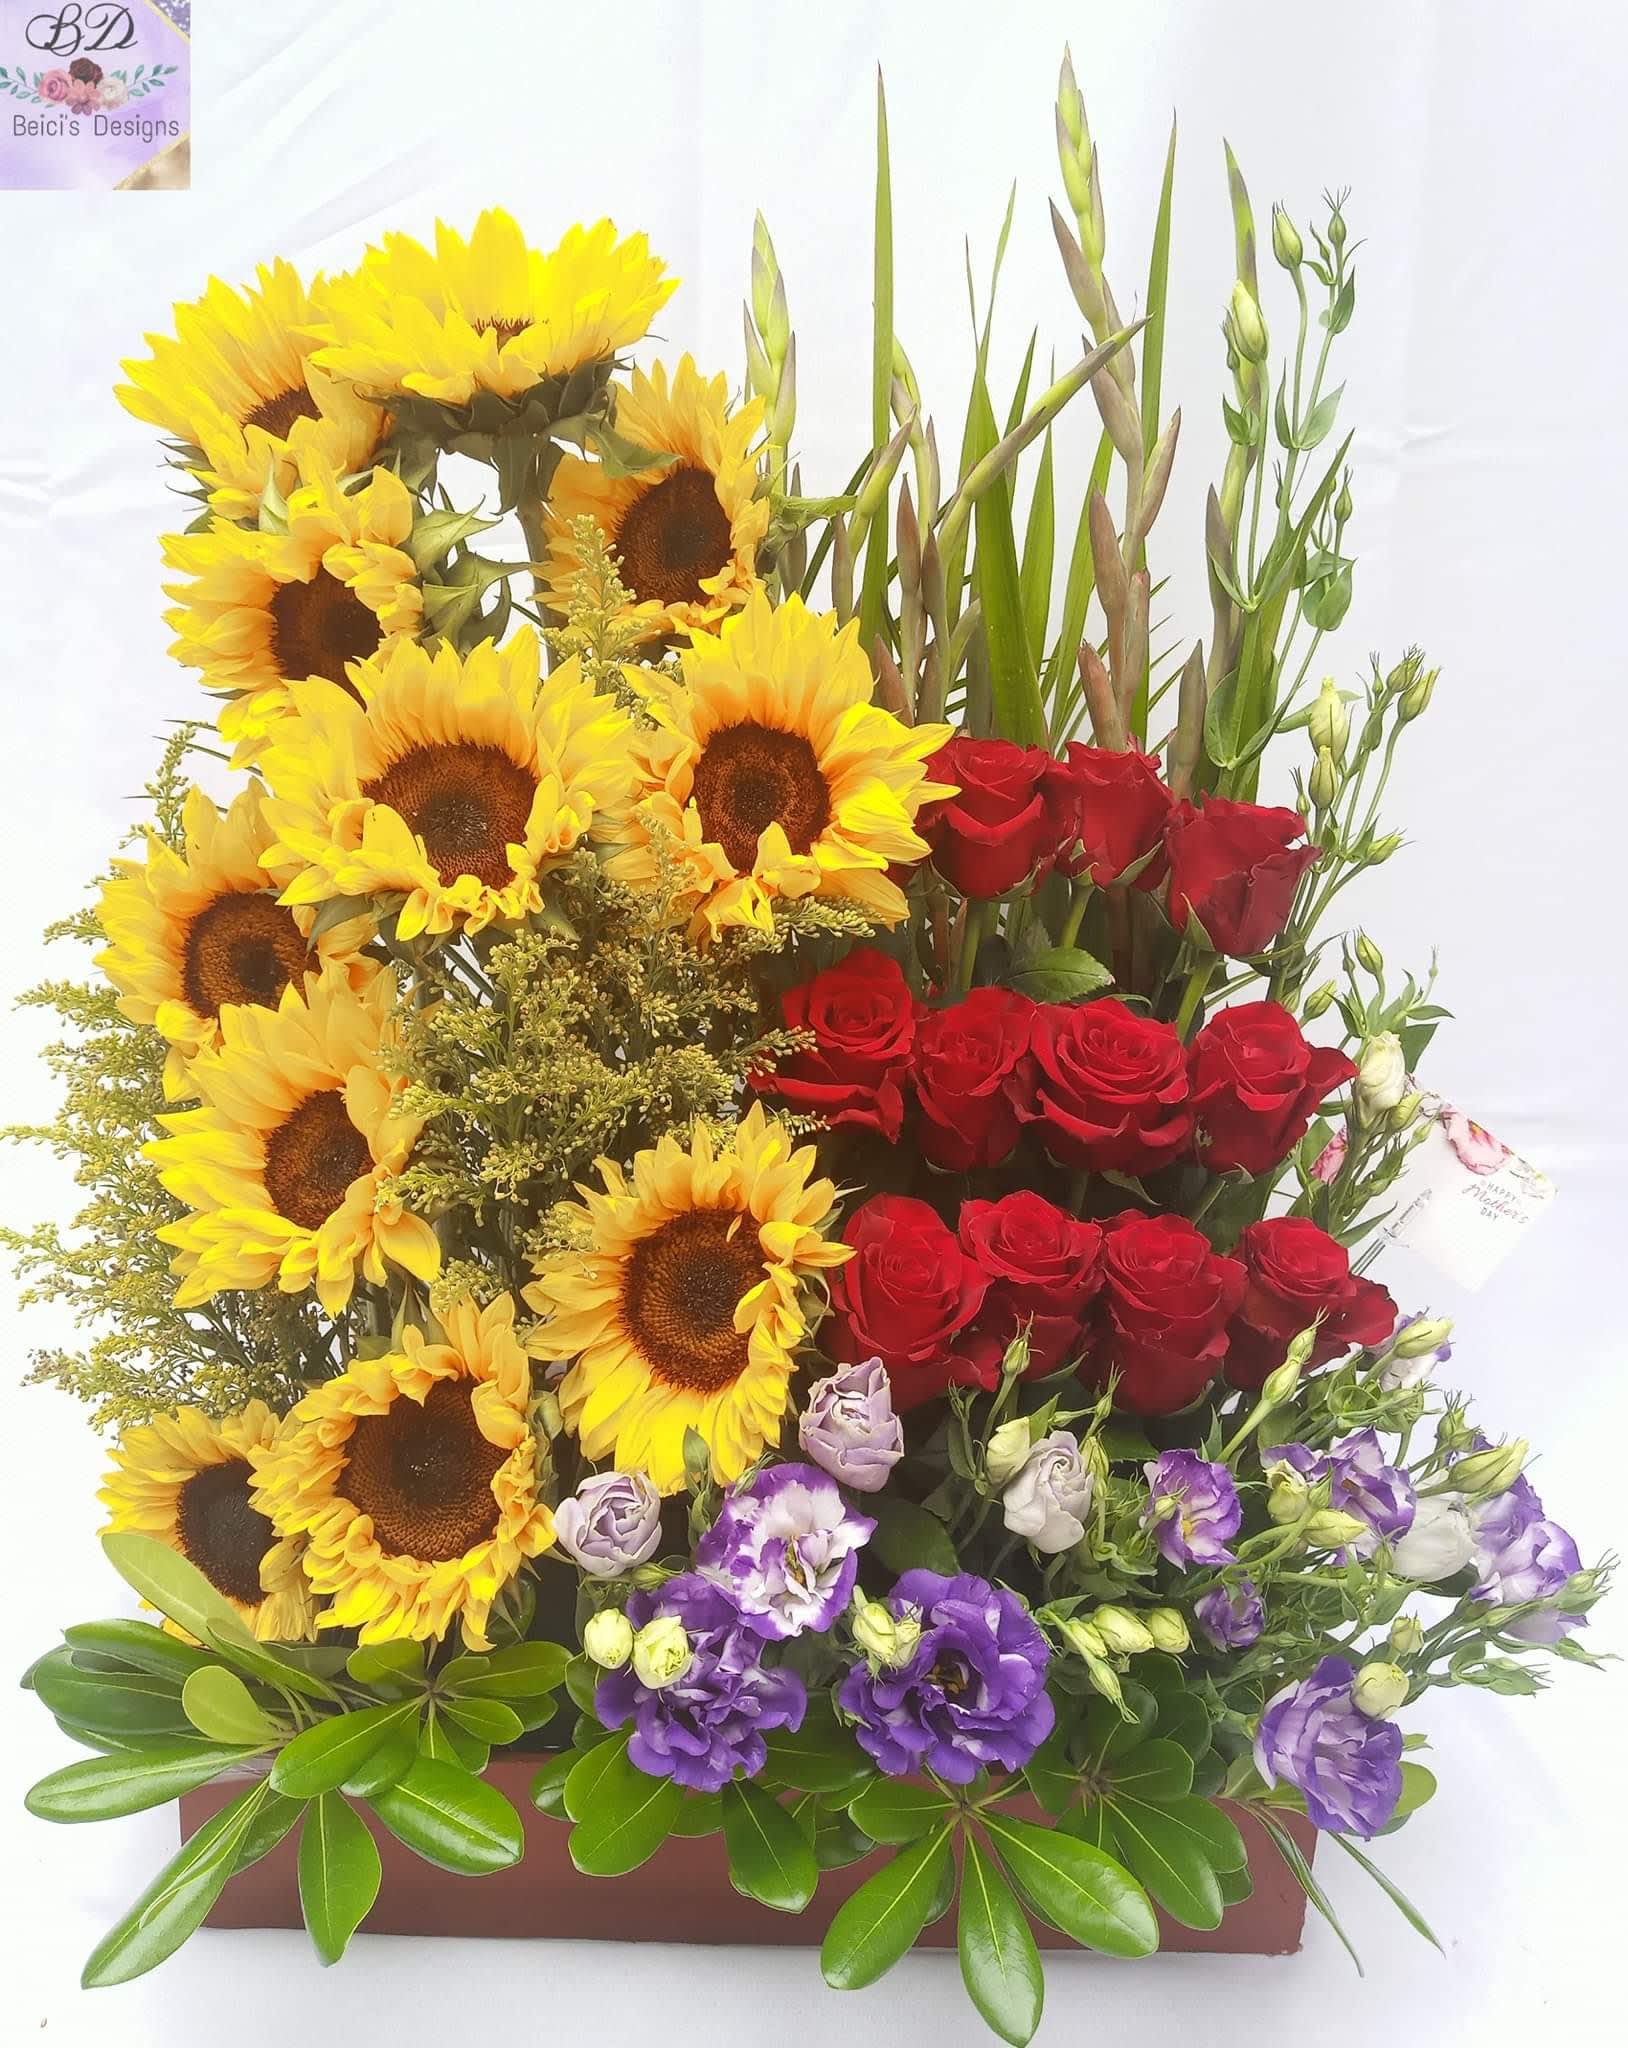 morning sunshine splash  - best way to surprise anyone in the morning!!!!!! sunflowers, snap dragoons red roses,,solidago and greensin a wooden basket